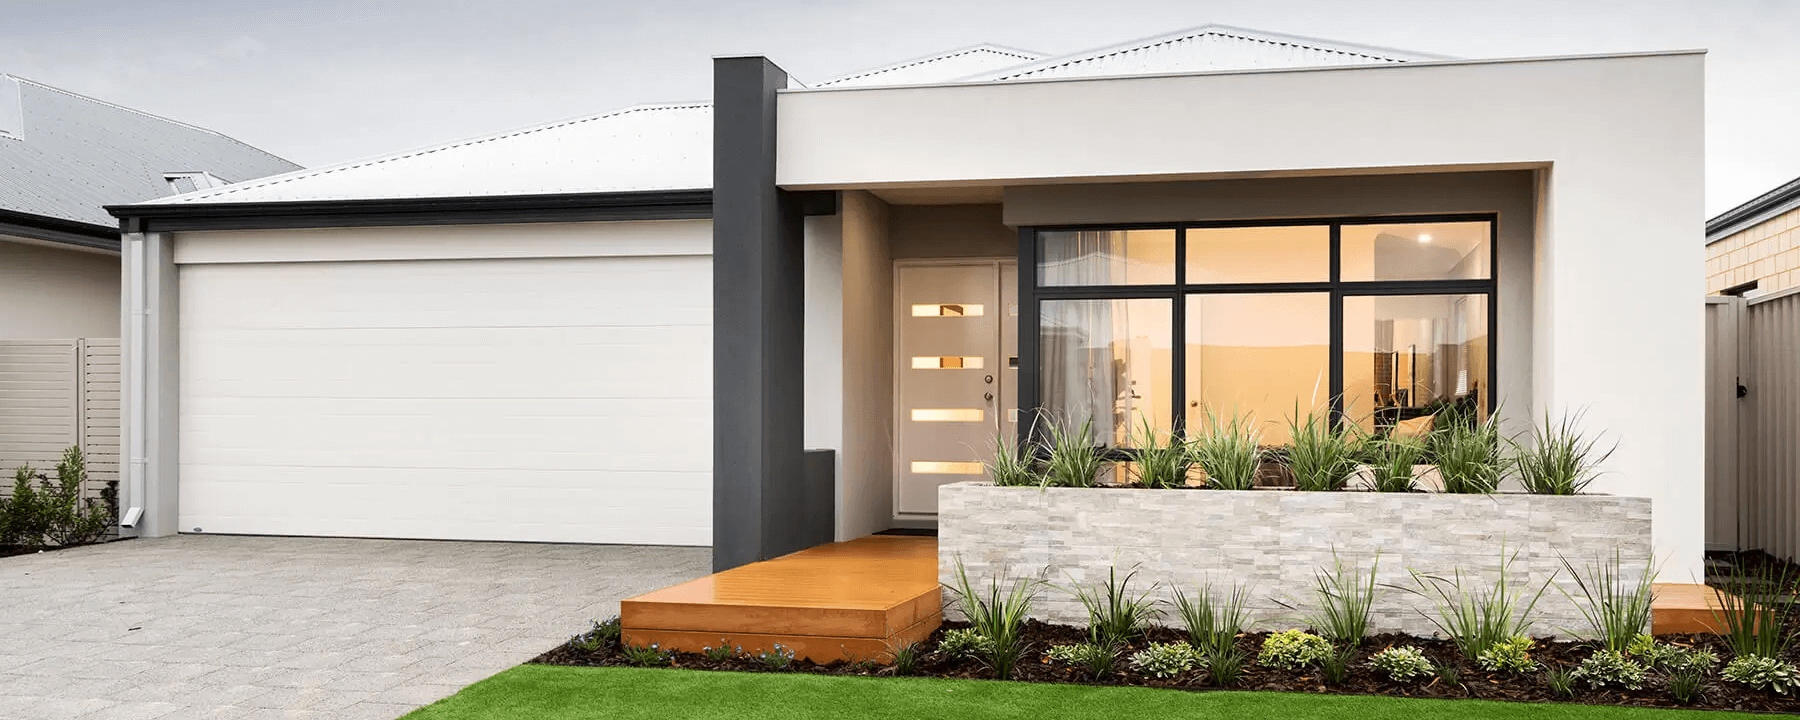 Frontage of a modern home design suitable for first home builders